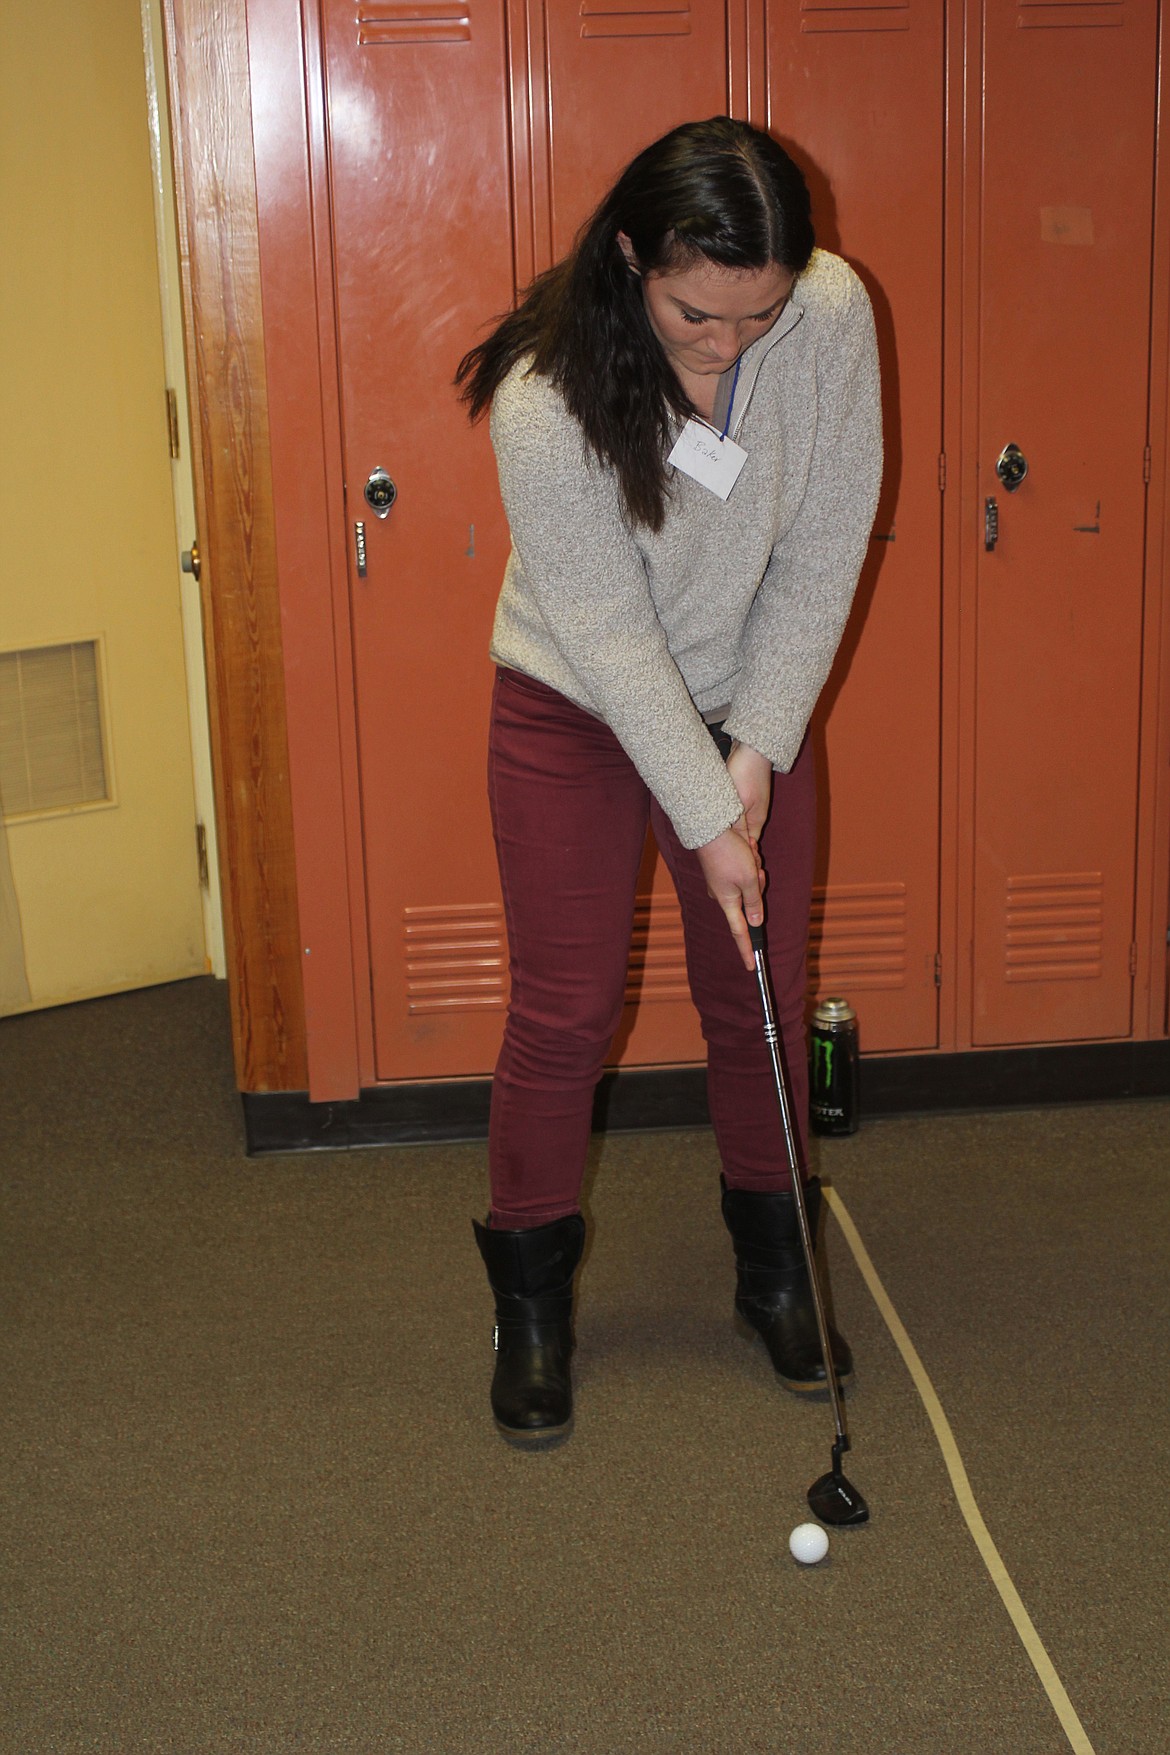 Jordan Plutt, the librarian at Plains school, is taking her stance at the golf ball putting game. (Douglas Wilks/Clark Fork Valley Press)